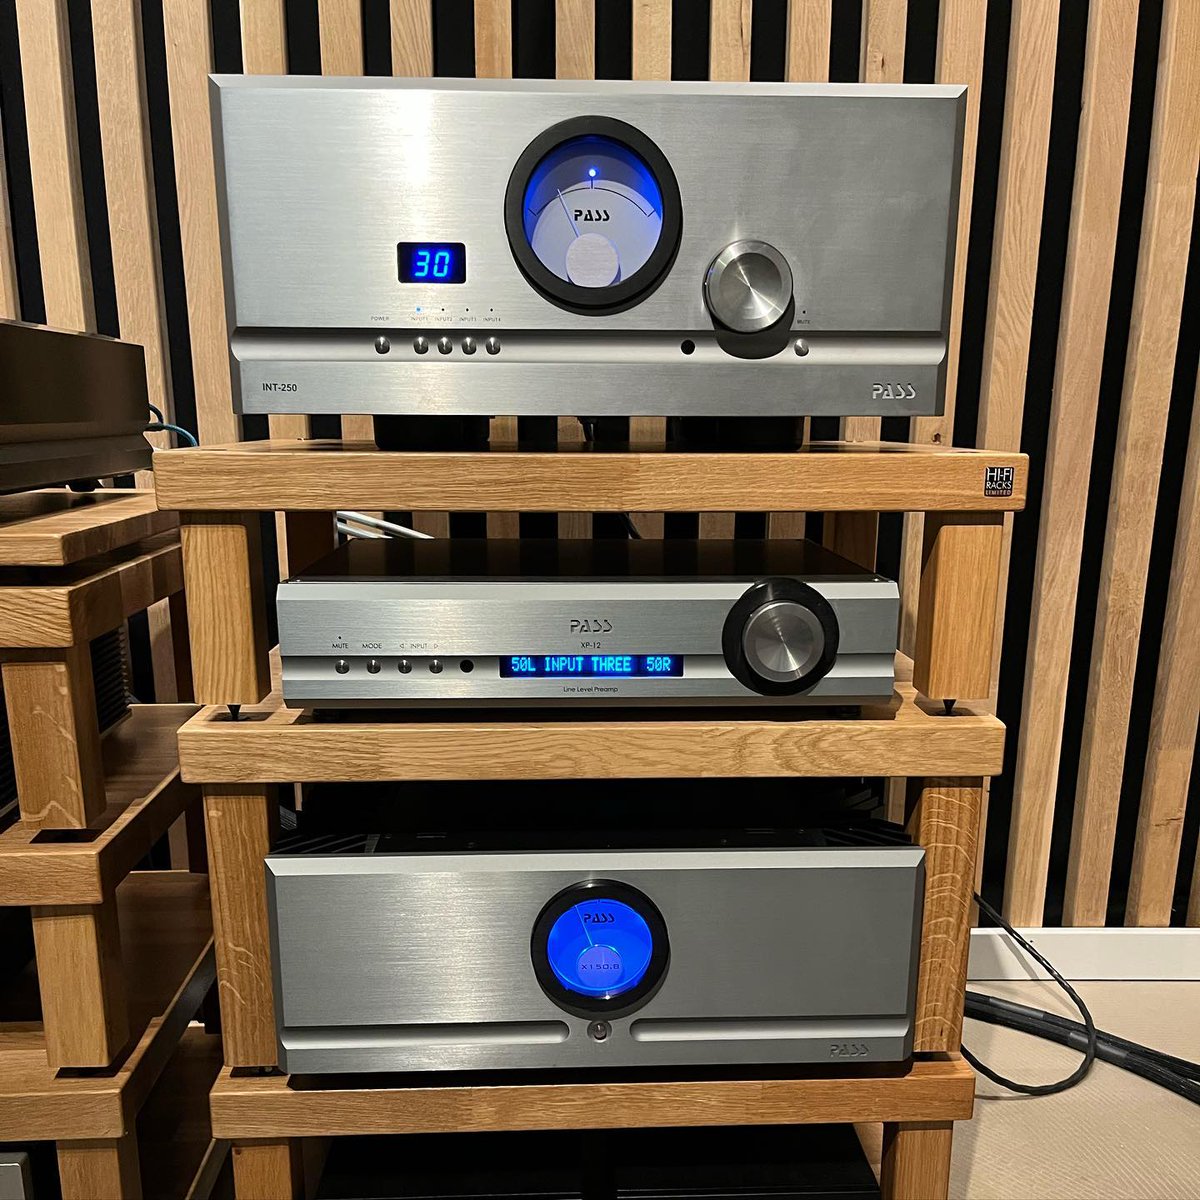 A match made in audio heaven ✨

#TADLabs loudspeakers meet their perfect match with the powerhouse #PassLabs amplifiers, elegantly showcased on a stunning solid oak Podium Reference hi-fi rack. Prepare to be blown away by this sensational #PoelsAudio listening room set-up!